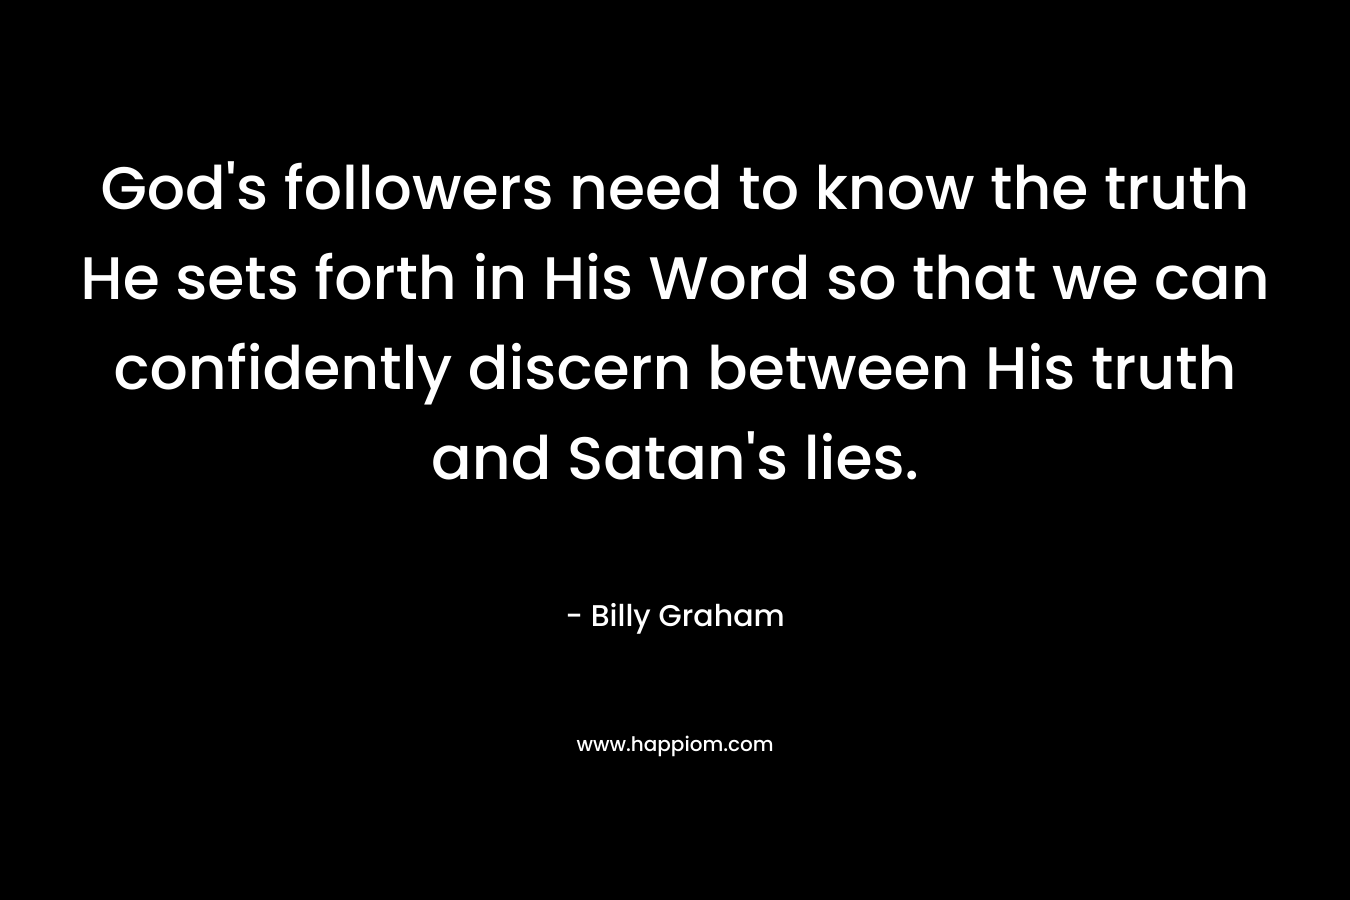 God’s followers need to know the truth He sets forth in His Word so that we can confidently discern between His truth and Satan’s lies. – Billy Graham